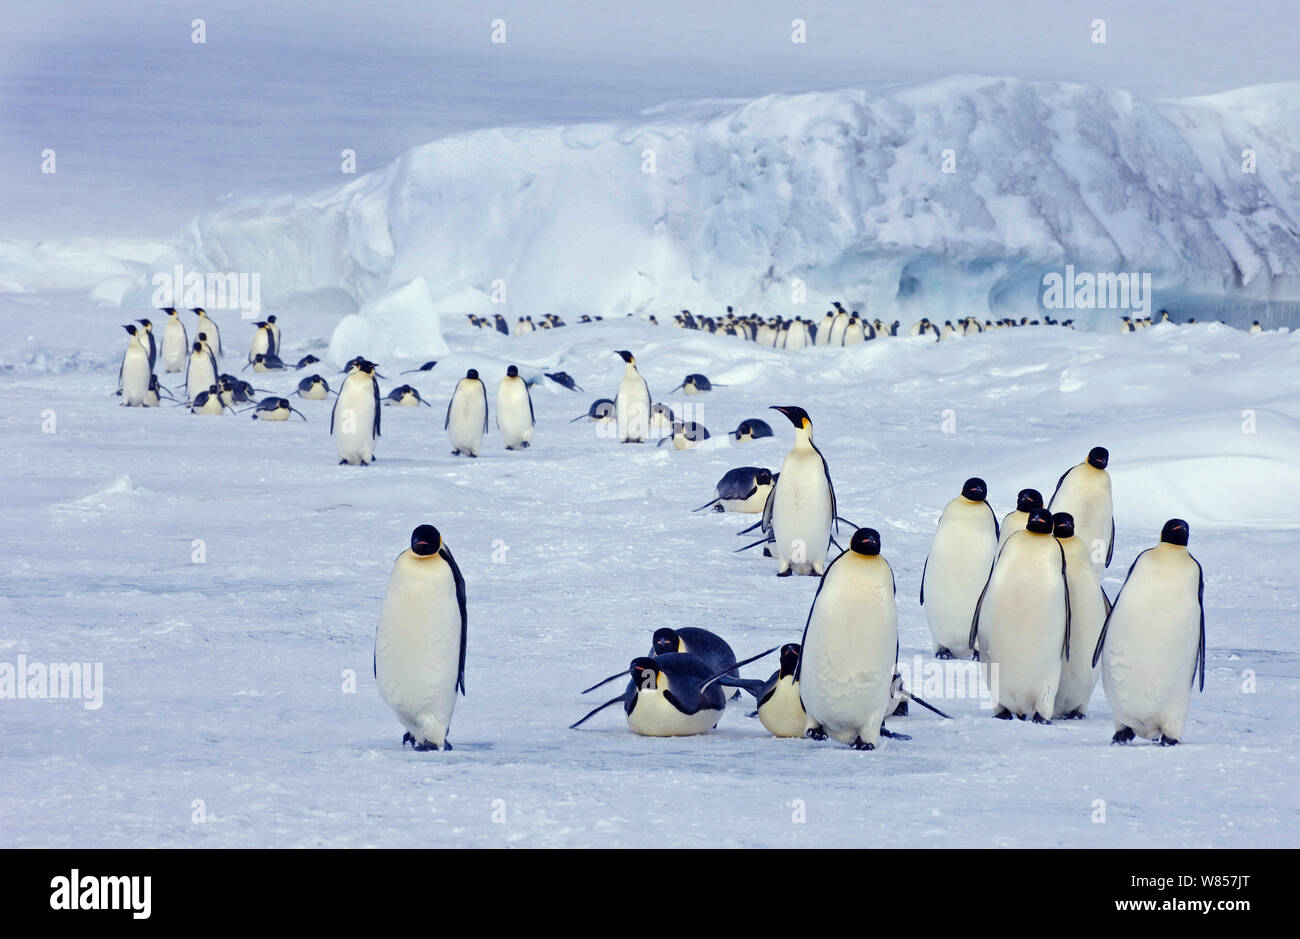 Emperor Penguins (Aptenodytes forsteri) on the march to the sea from their colony Snow Hill Island, Antarctica, November Stock Photo